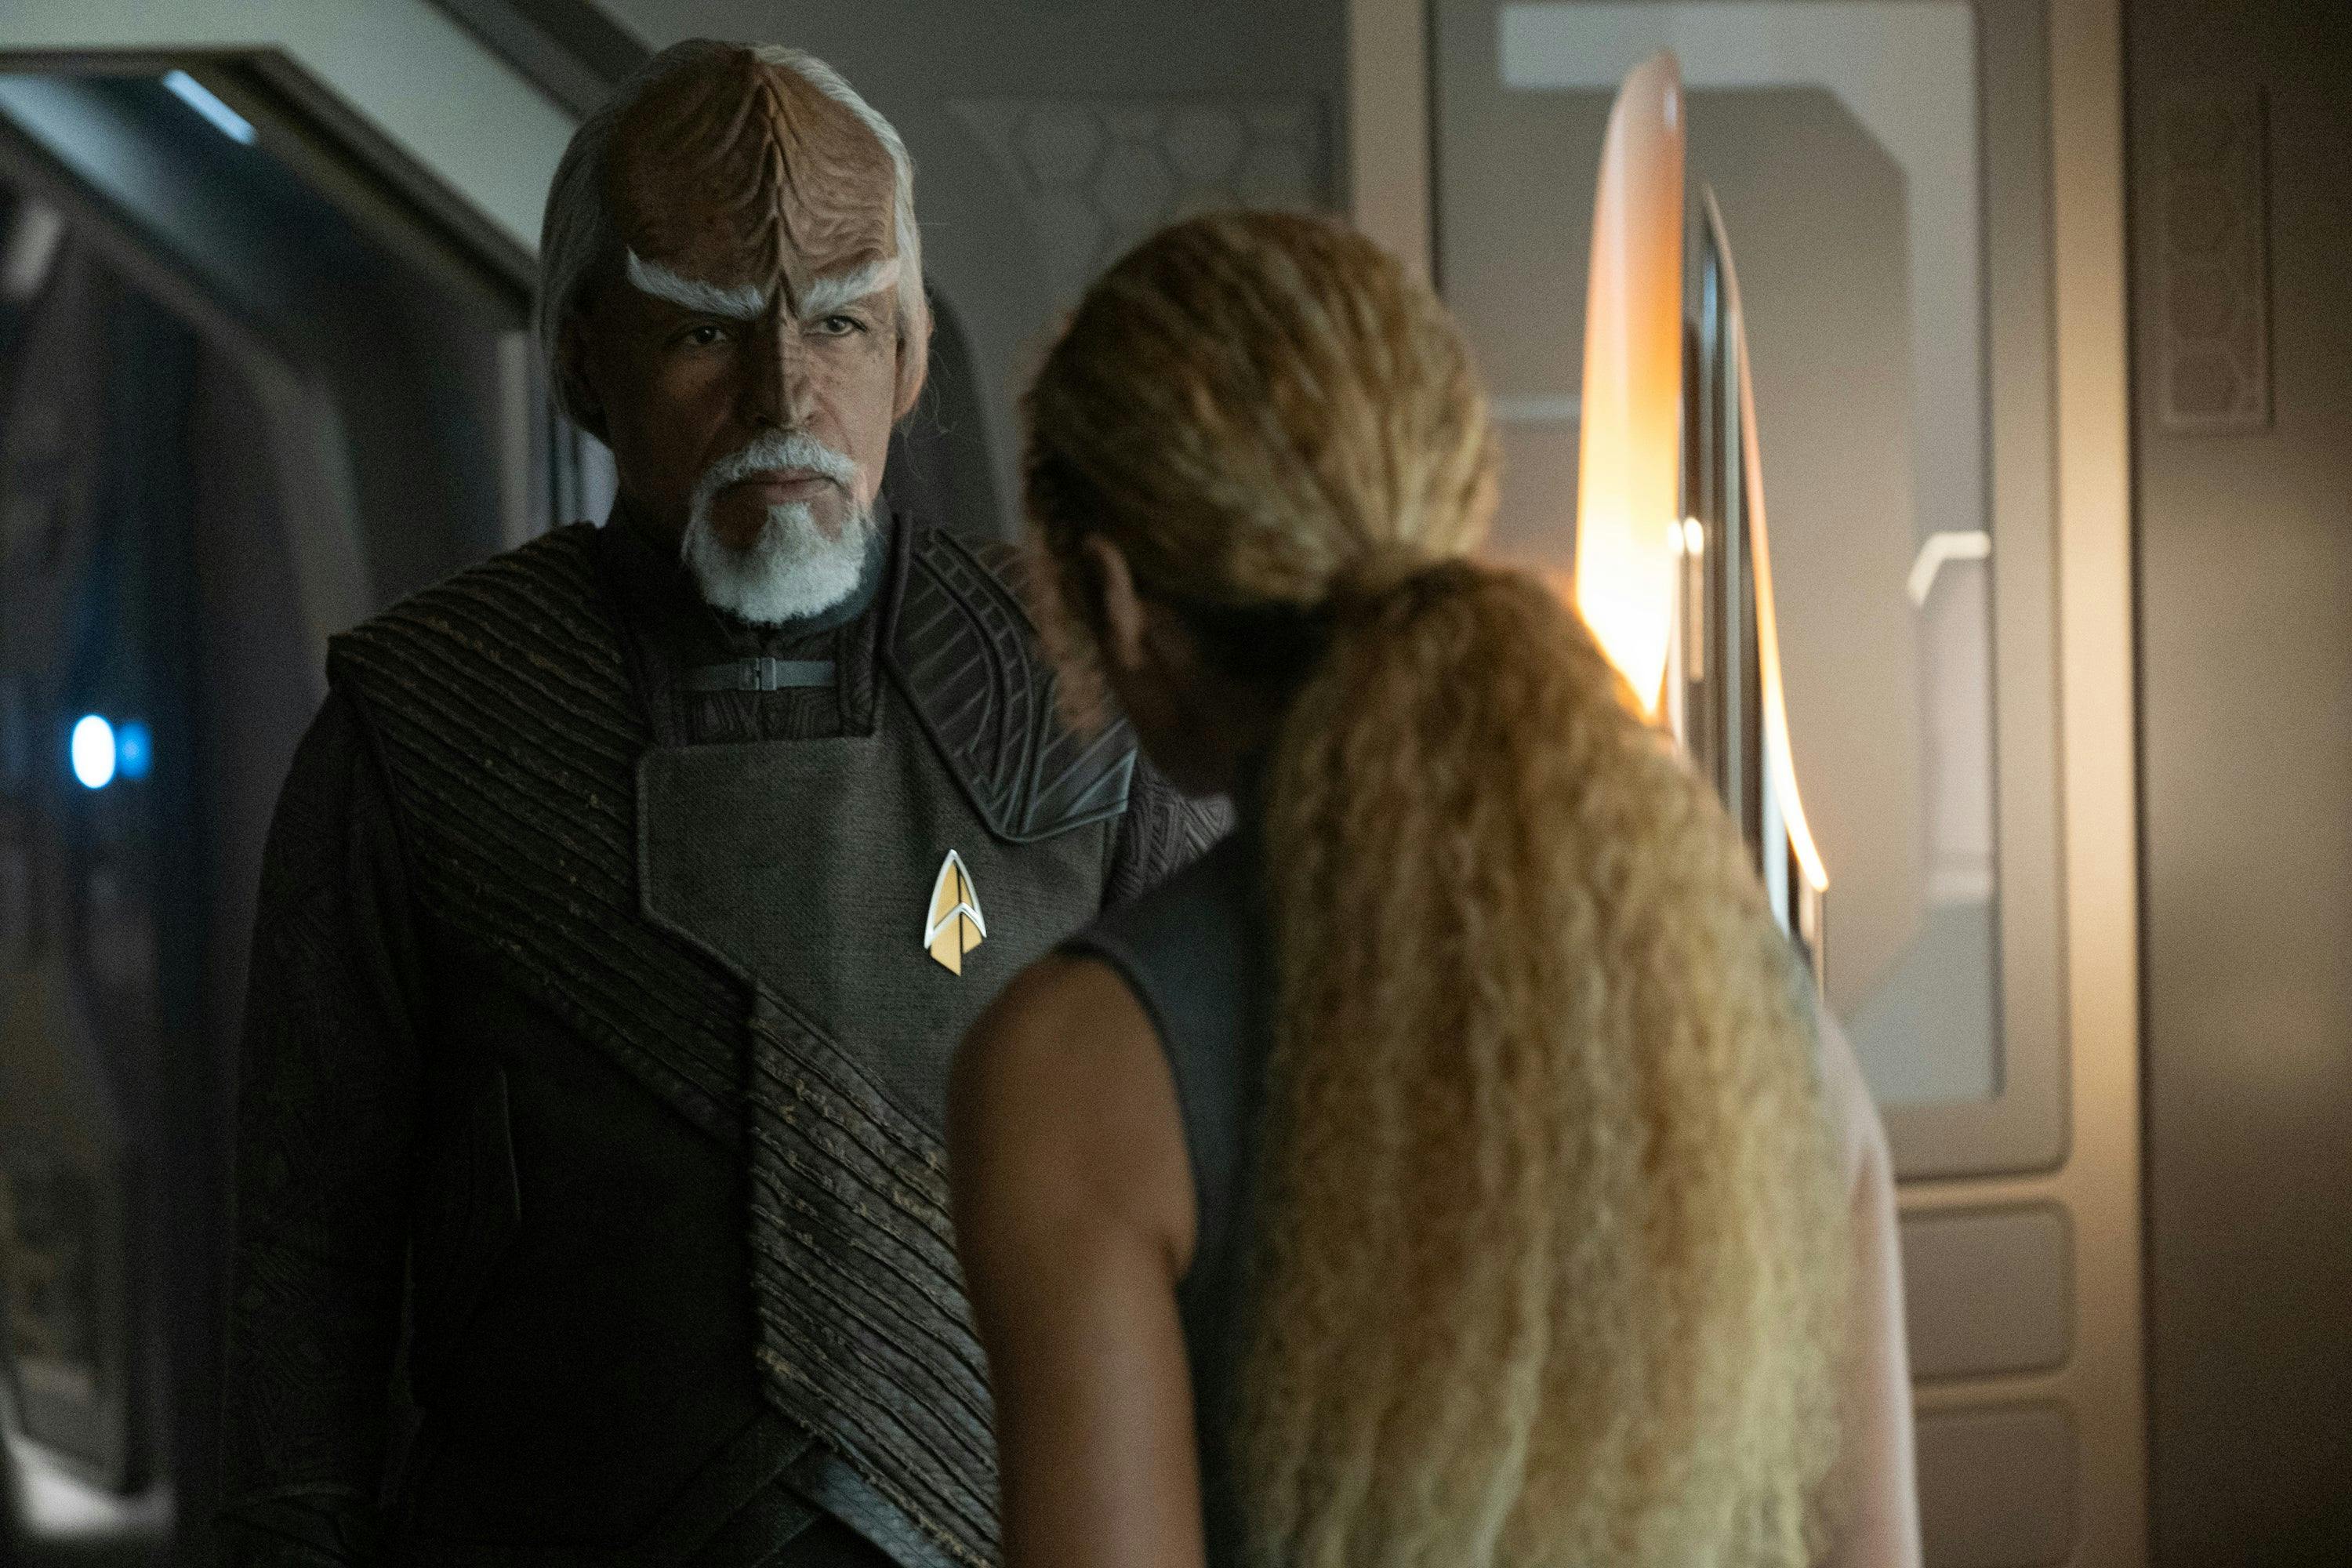 Worf and Raffi face one another in 'The Last Generation'